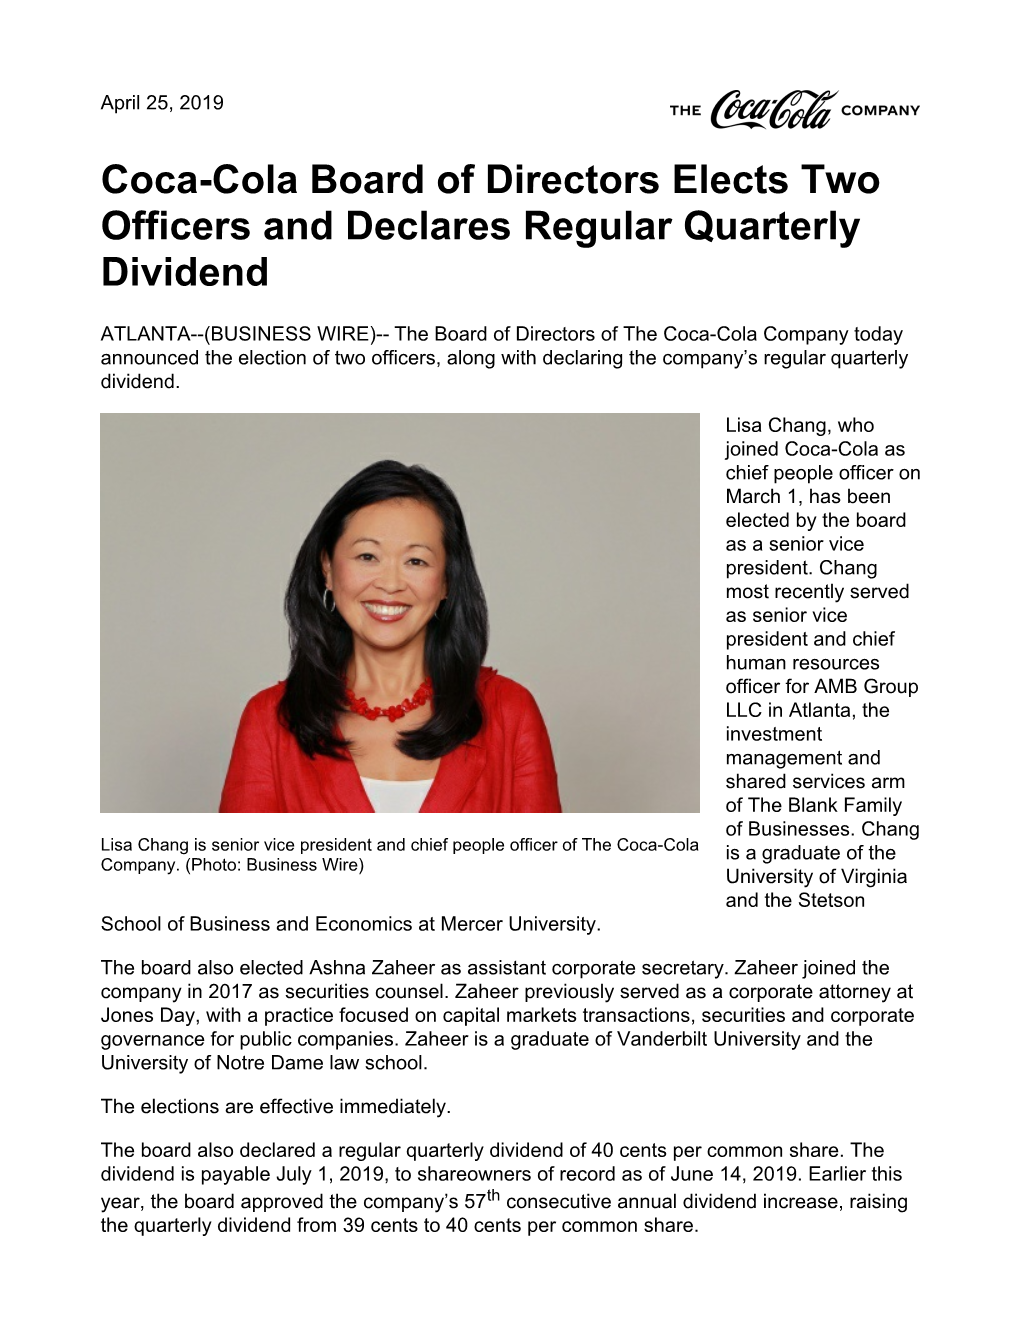 Coca-Cola Board of Directors Elects Two Officers and Declares Regular Quarterly Dividend